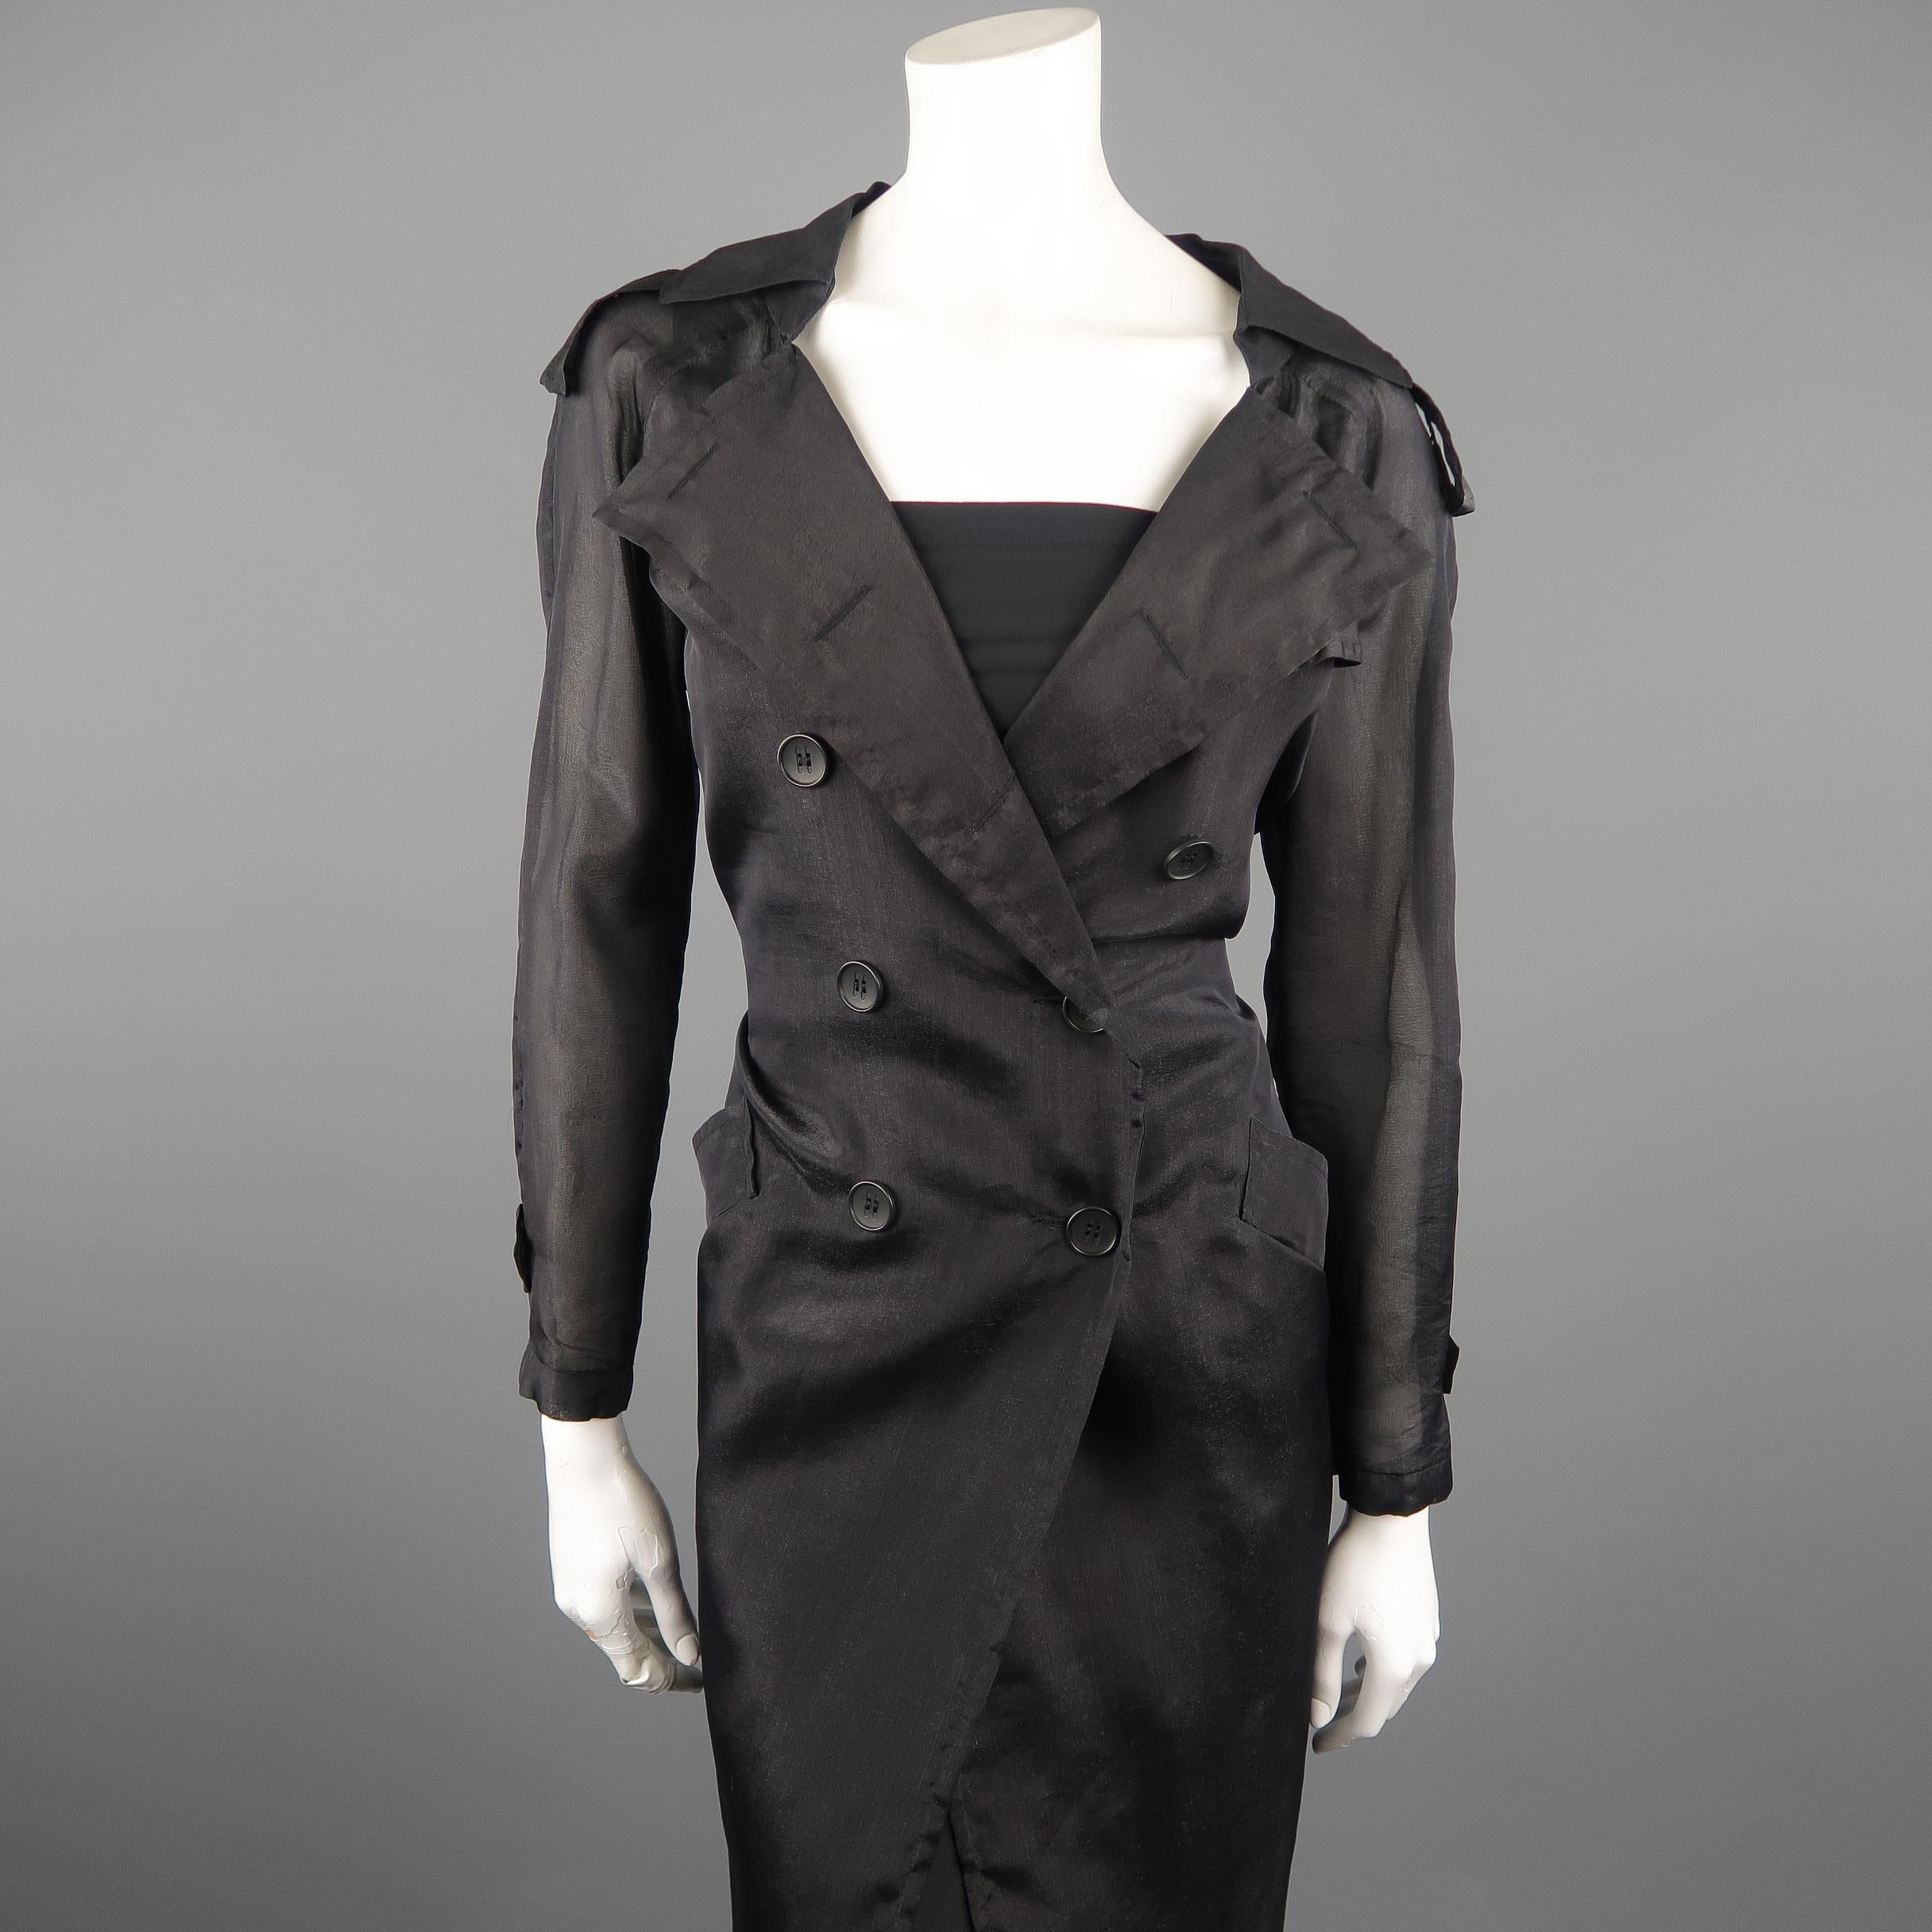 MAX MARA trench coat comes in metallic sheer black silk blend organza with a double breasted button up front, slanted pockets, pointed collar, epaulets, cropped sleeves, and stretch tube dress undergarment. Made in Italy.
 
Very Good Pre-Owned